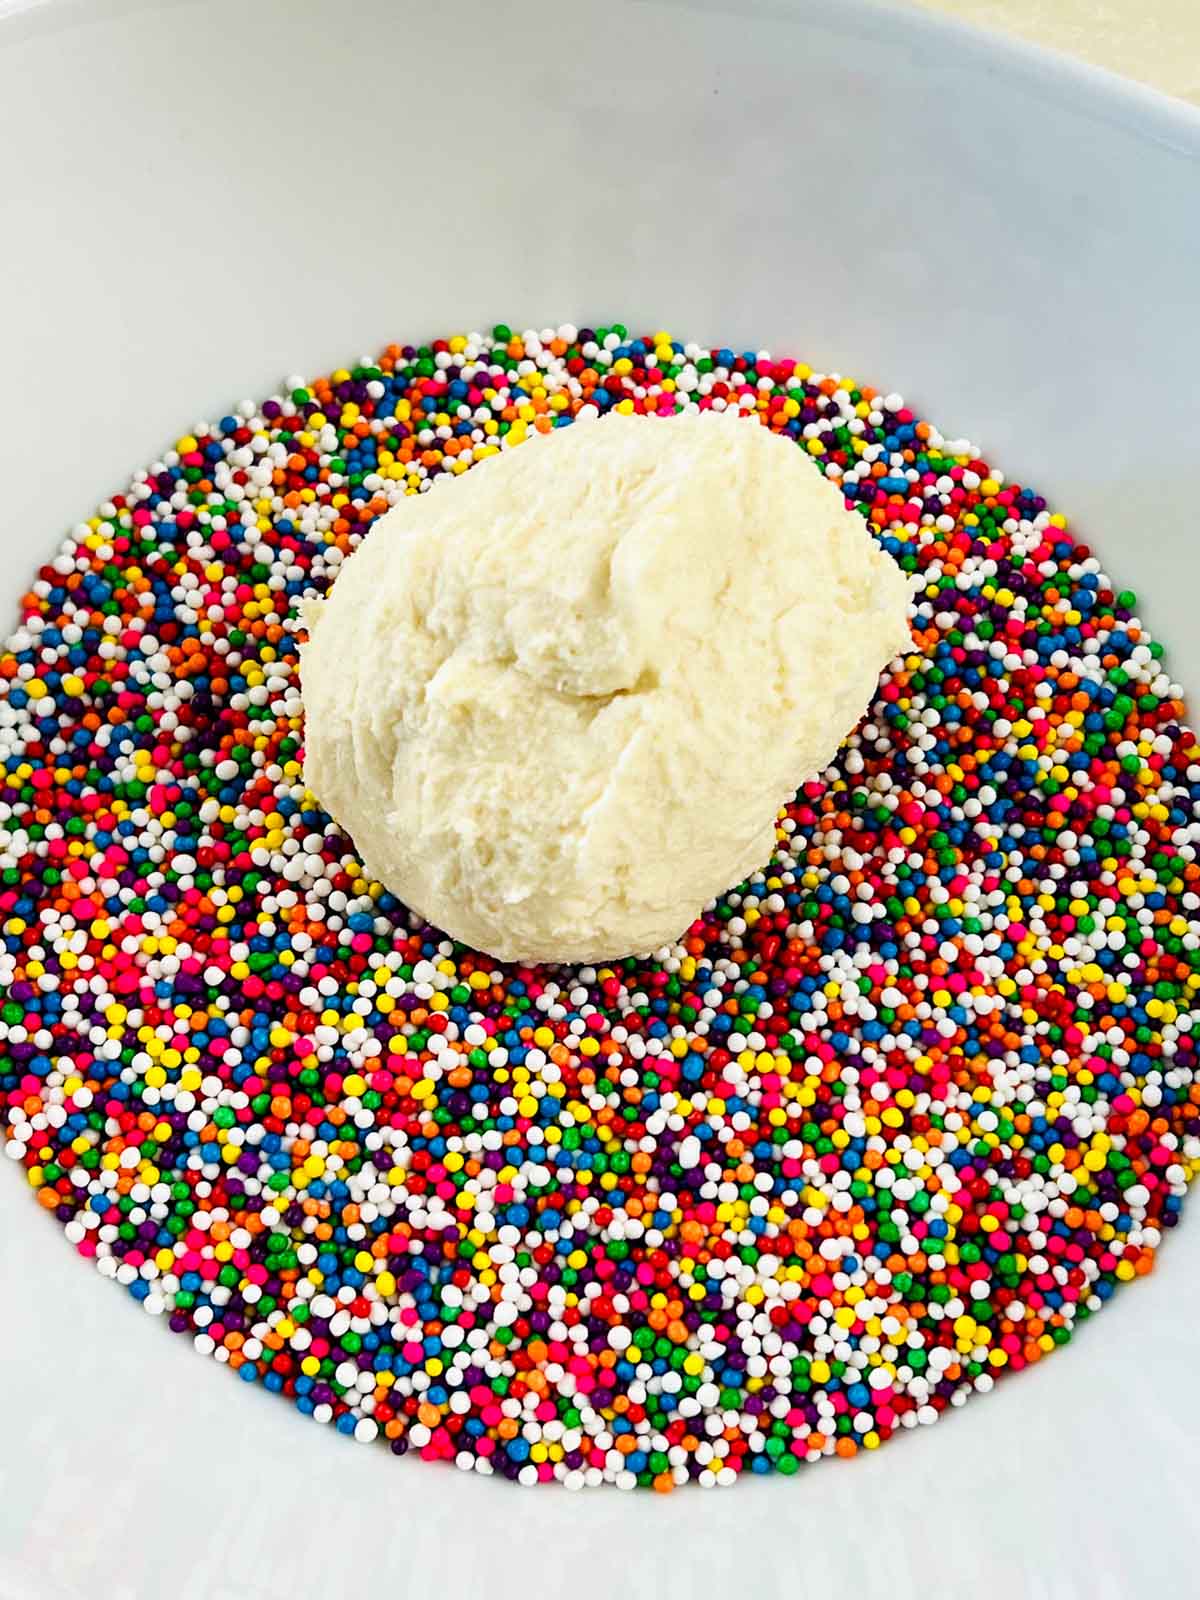 A ball of cookie dough in a bowl with sprinkles.